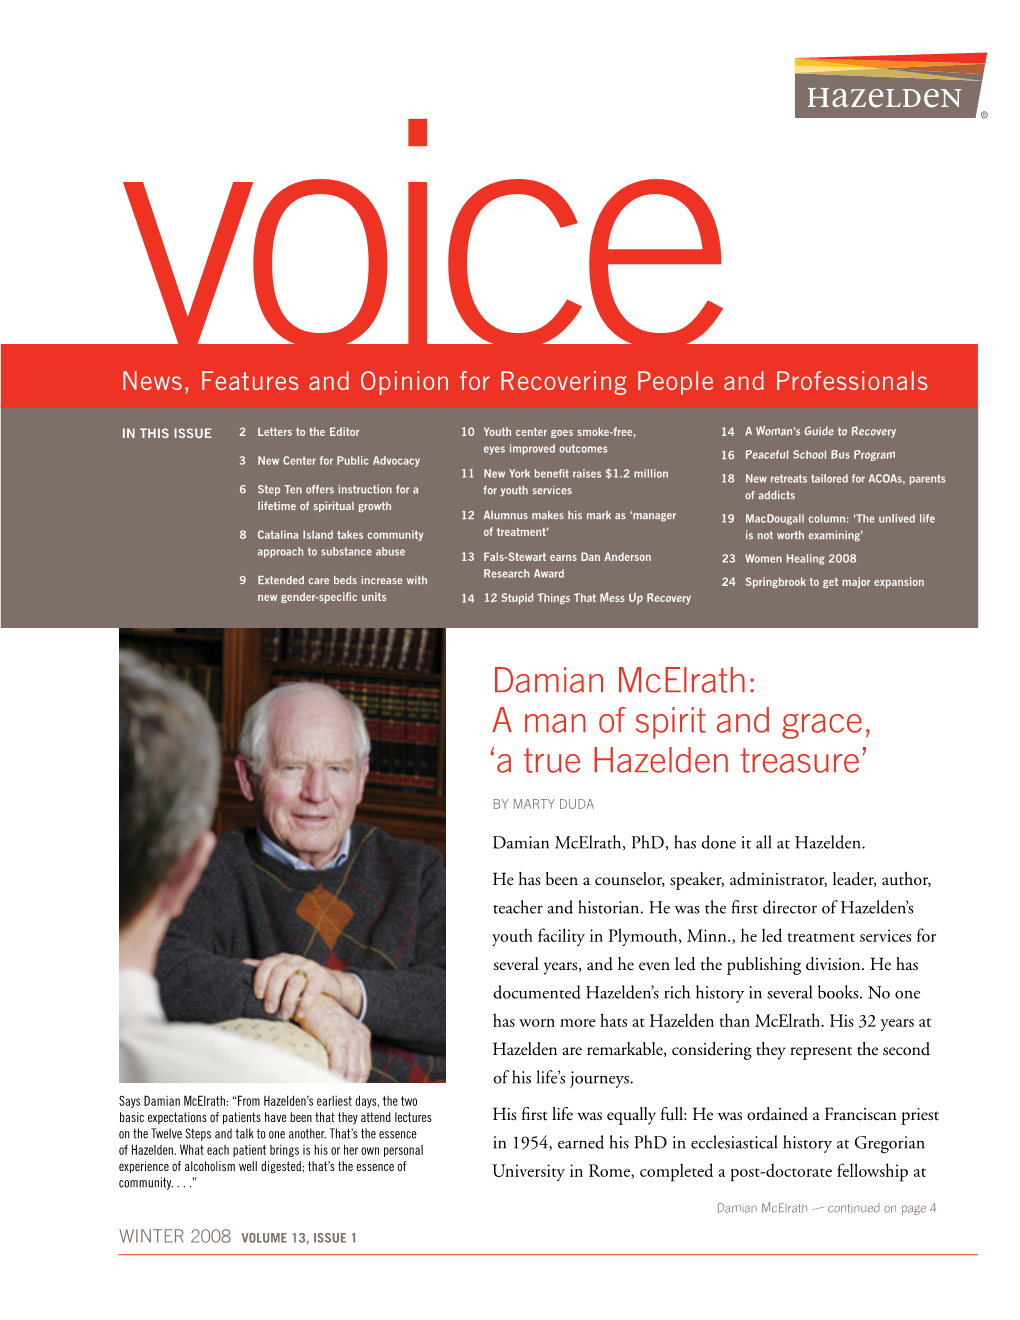 The Voice Is a Free Publication Distributed Me About Making Amends